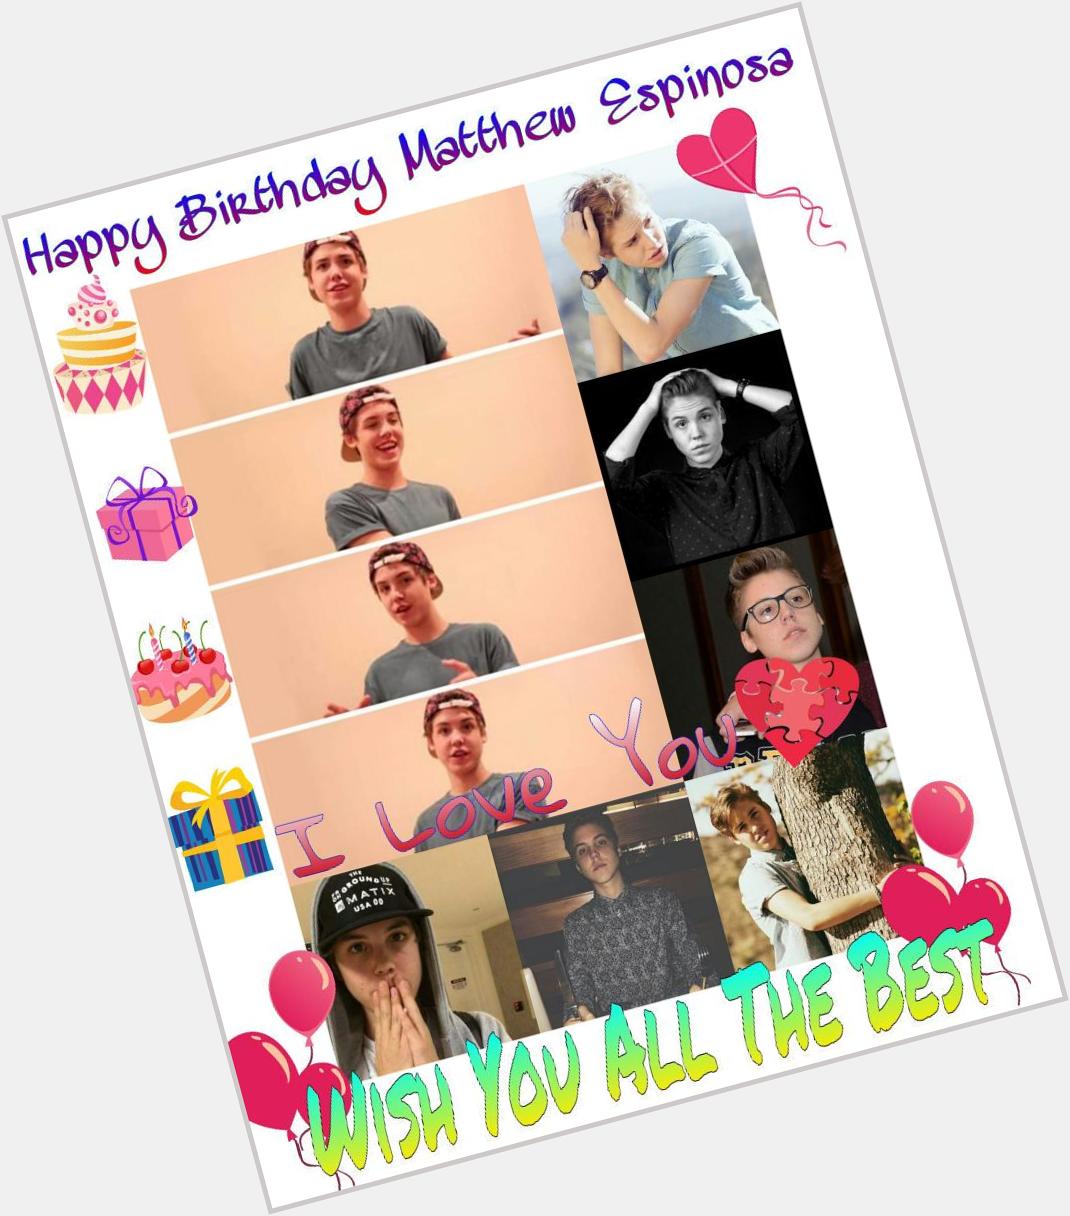 HAPPY BIRTHDAY MATTHEW  ESPINOSA
ALWAYS BEEN A GOOD AND WISE MAN     